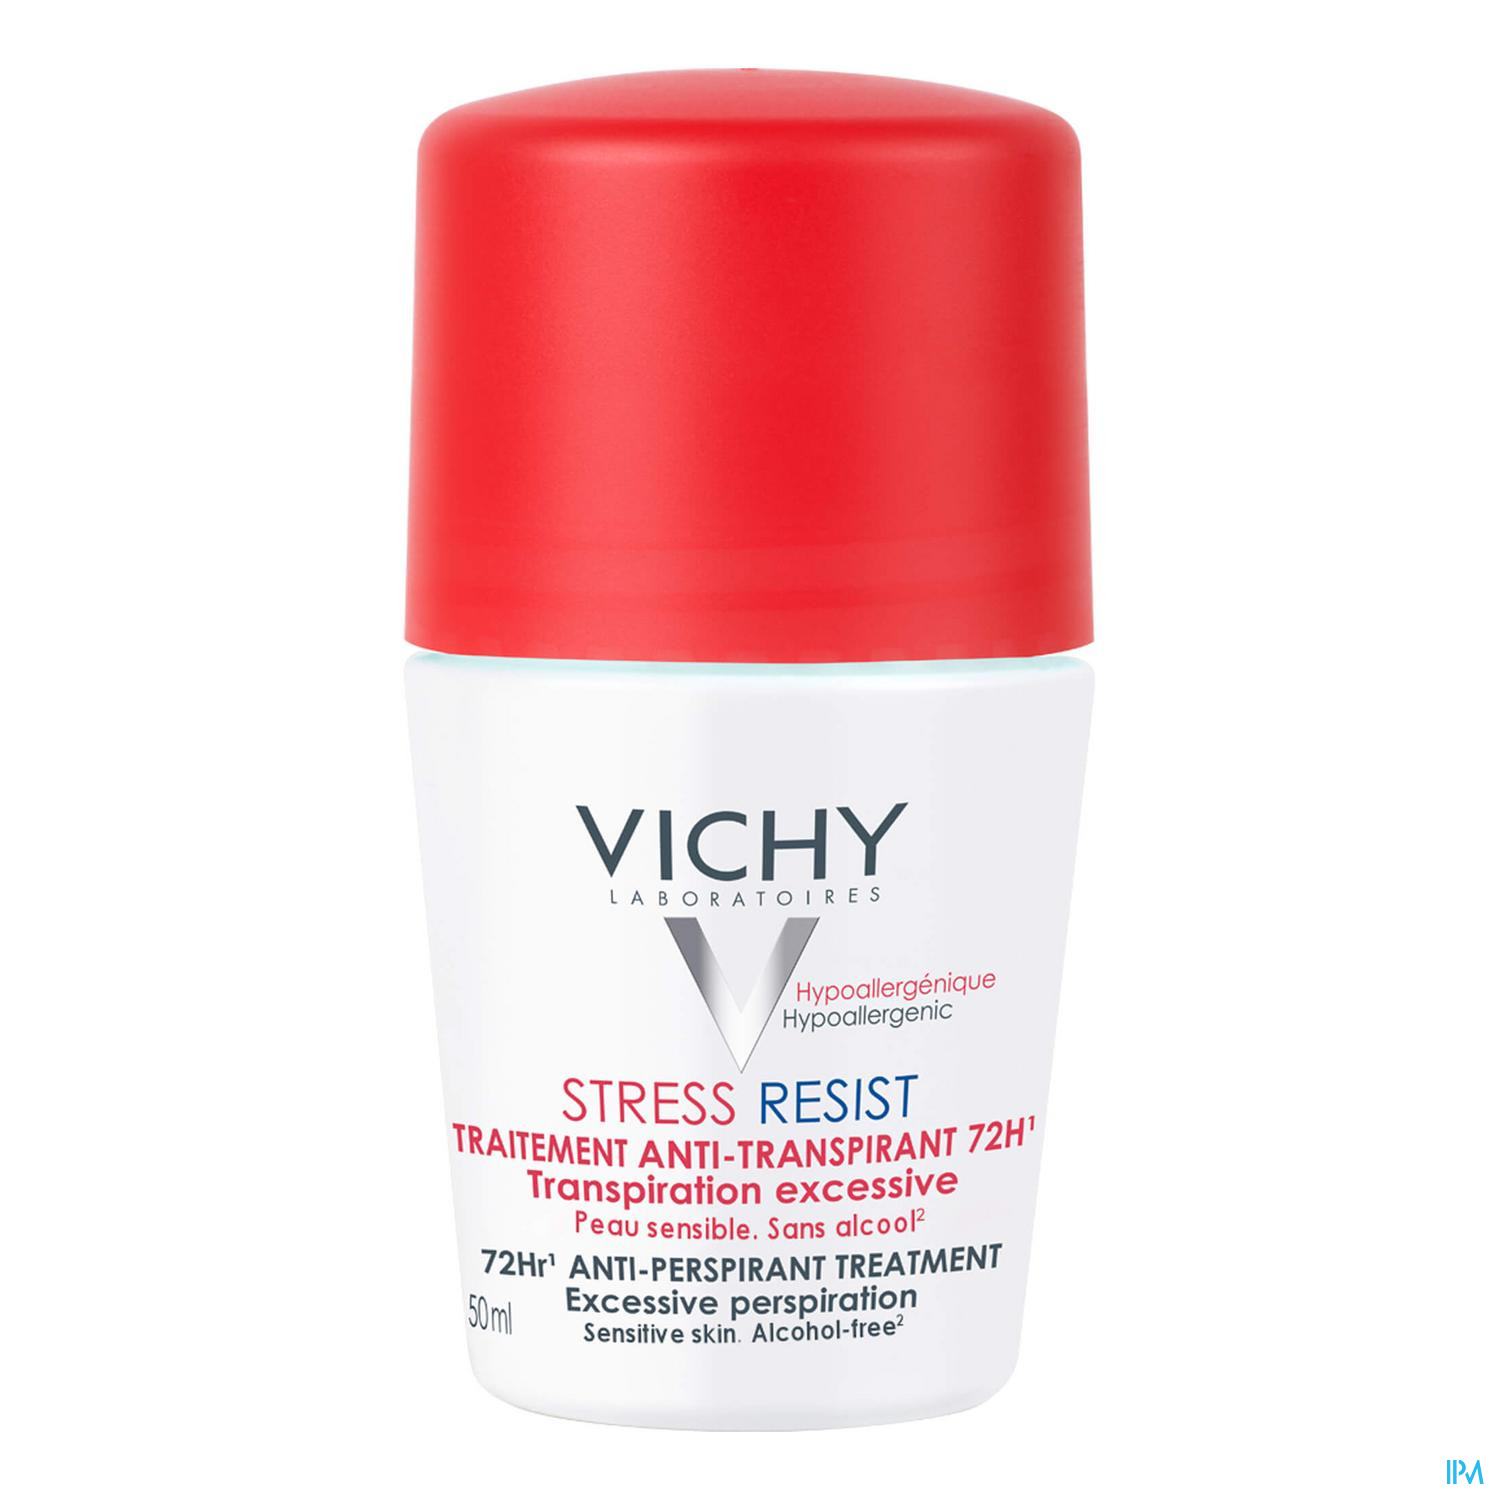 VICHY DEO STRESS RES.72H 50ML